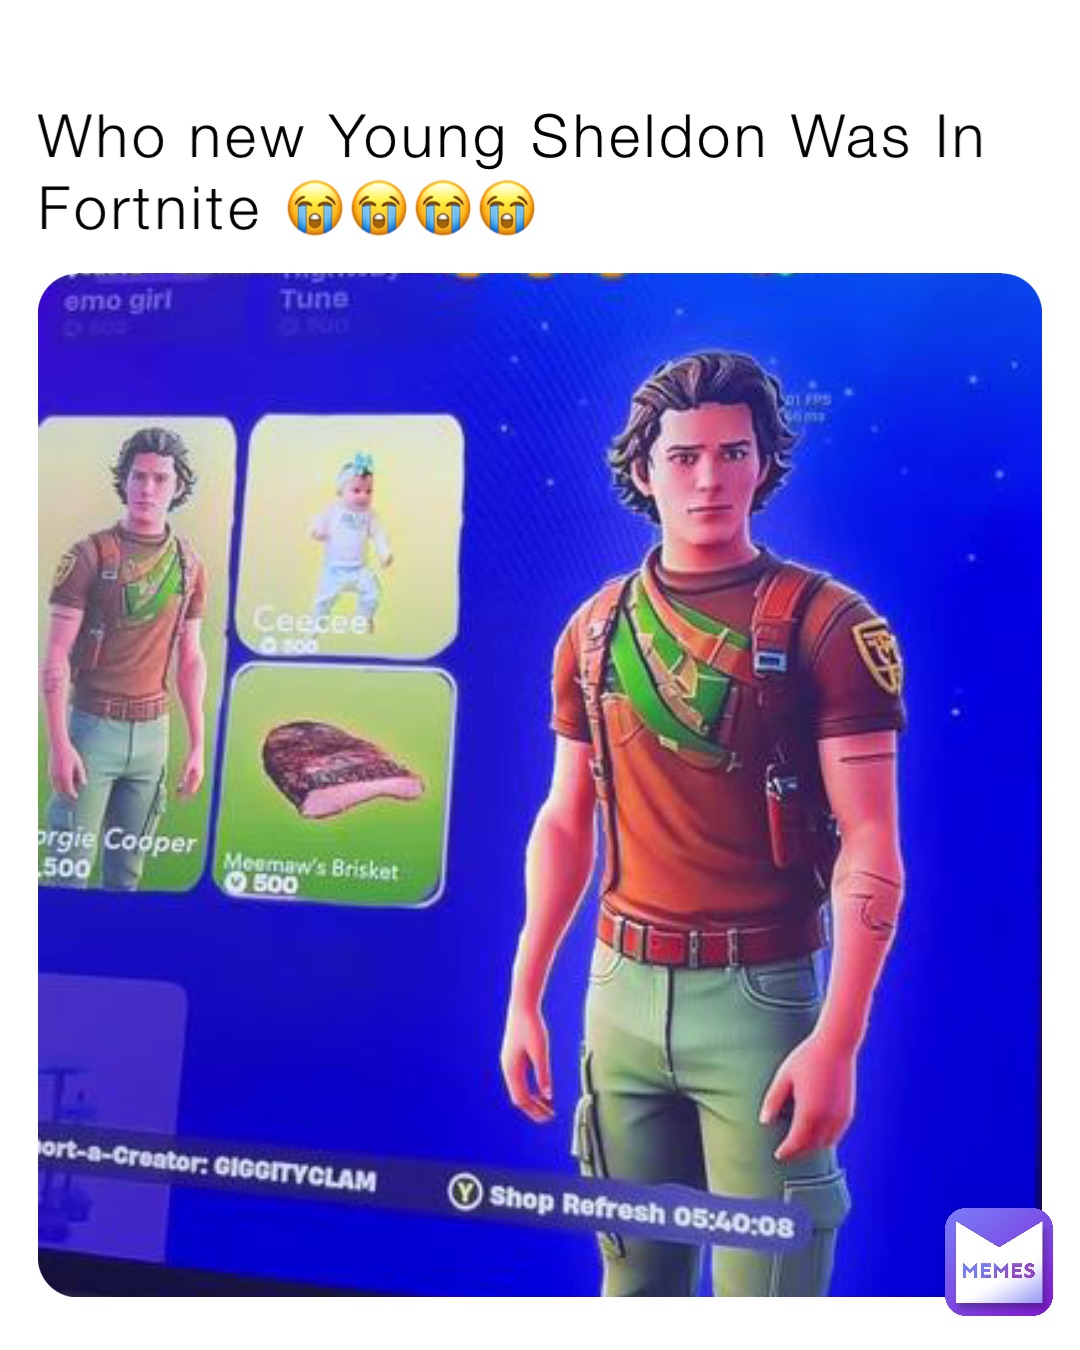 Who new Young Sheldon Was In Fortnite 😭😭😭😭